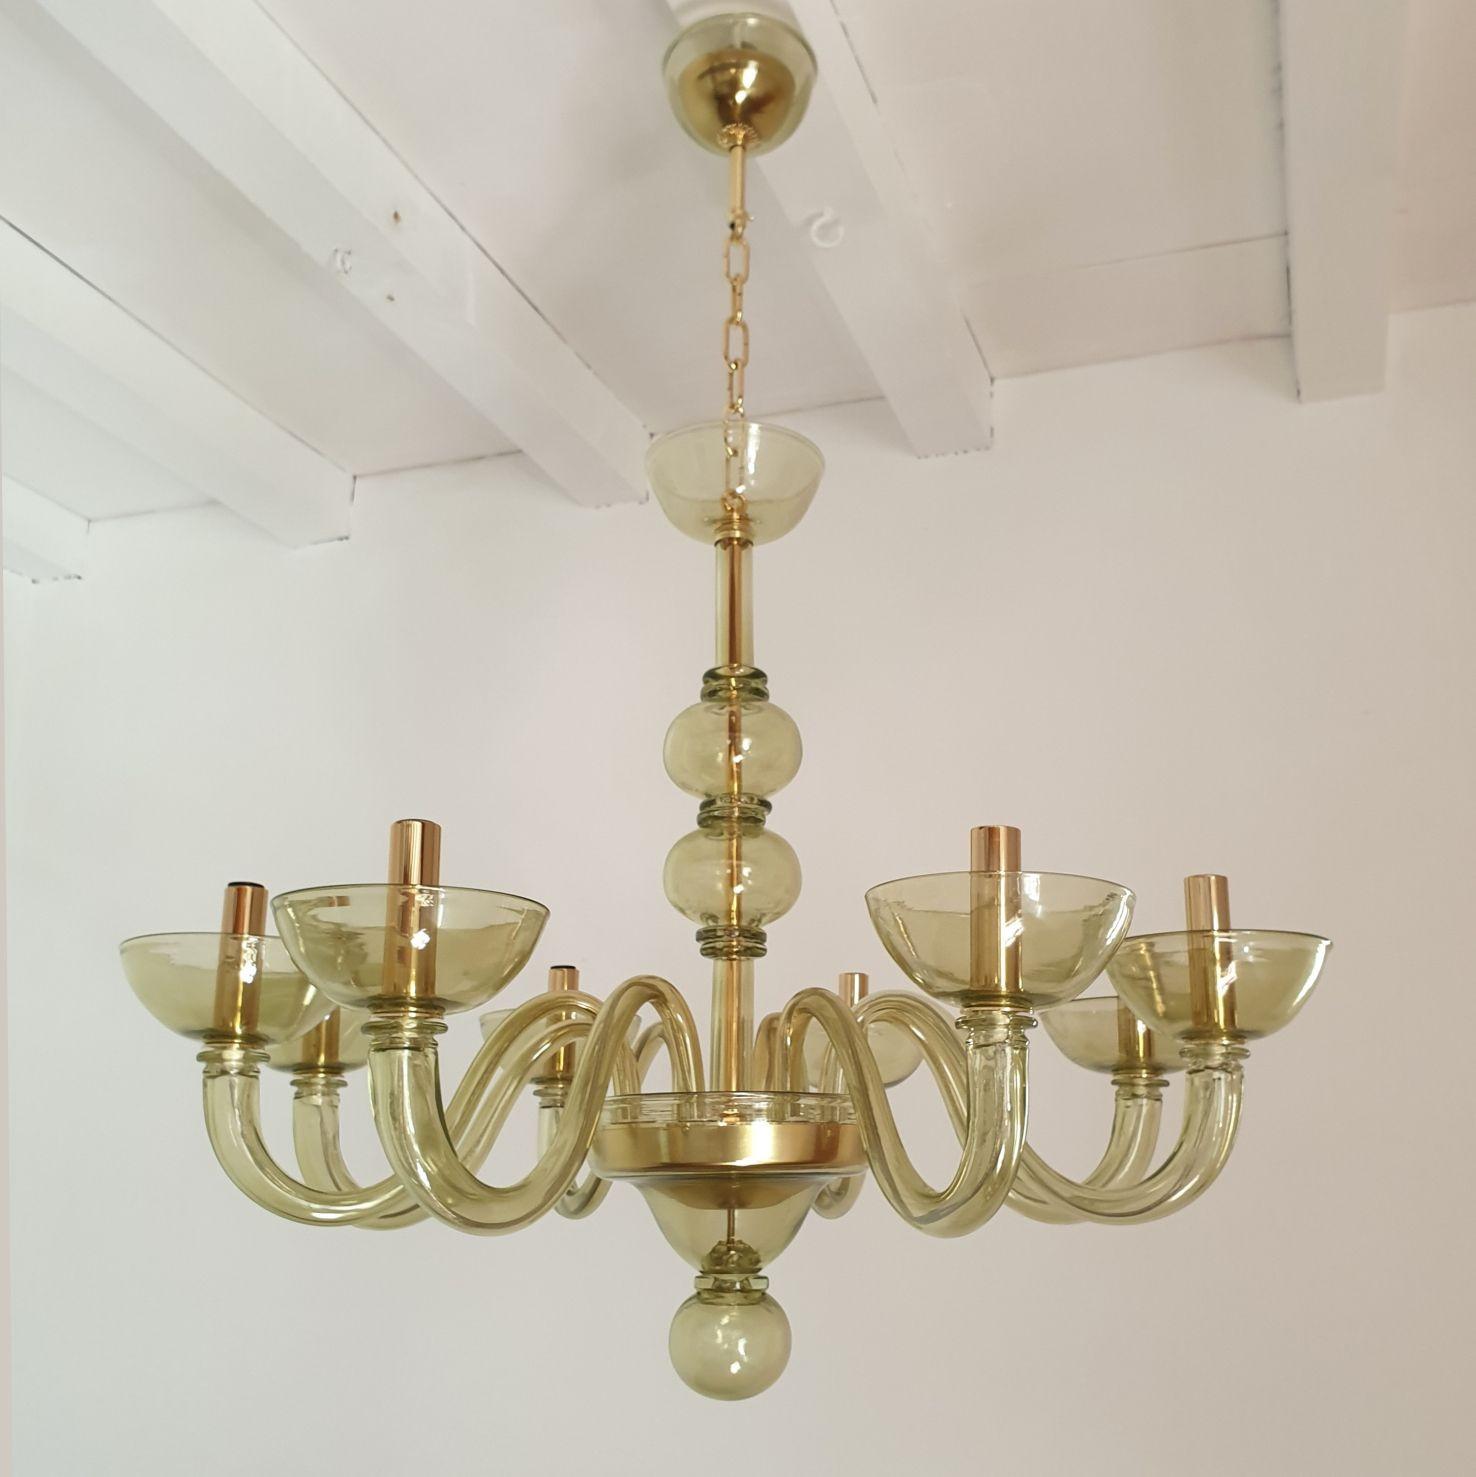 Mid-Century Modern light green Murano glass chandelier, attributed to Seguso - Italy 1980s 
The Murano glass chandelier is hand blown, in a light olive green color with gold plated mounts.
The neoclassical chandelier has 8 lights or arms.
It's